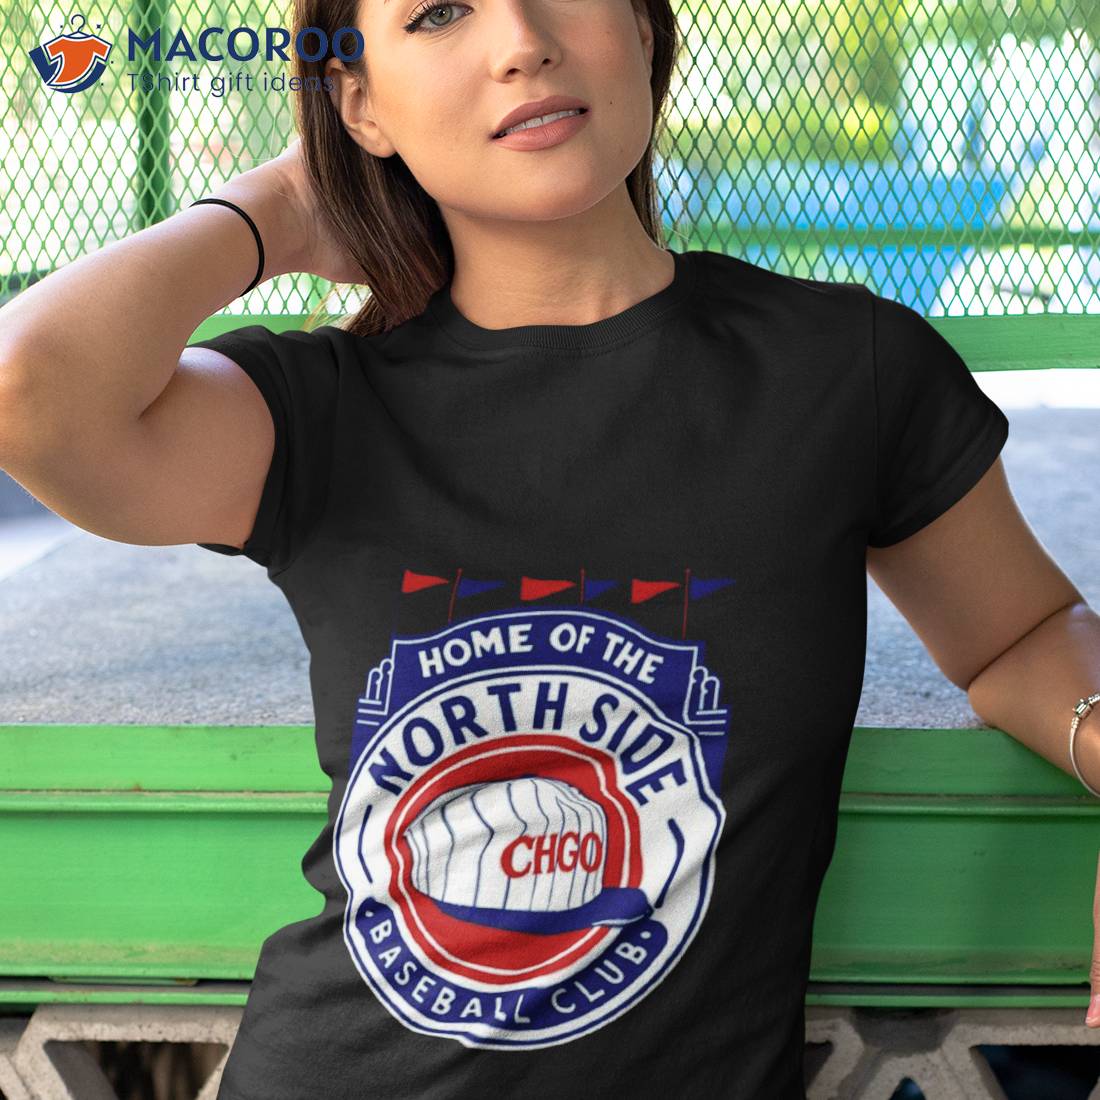 chicago cubs north side t shirt